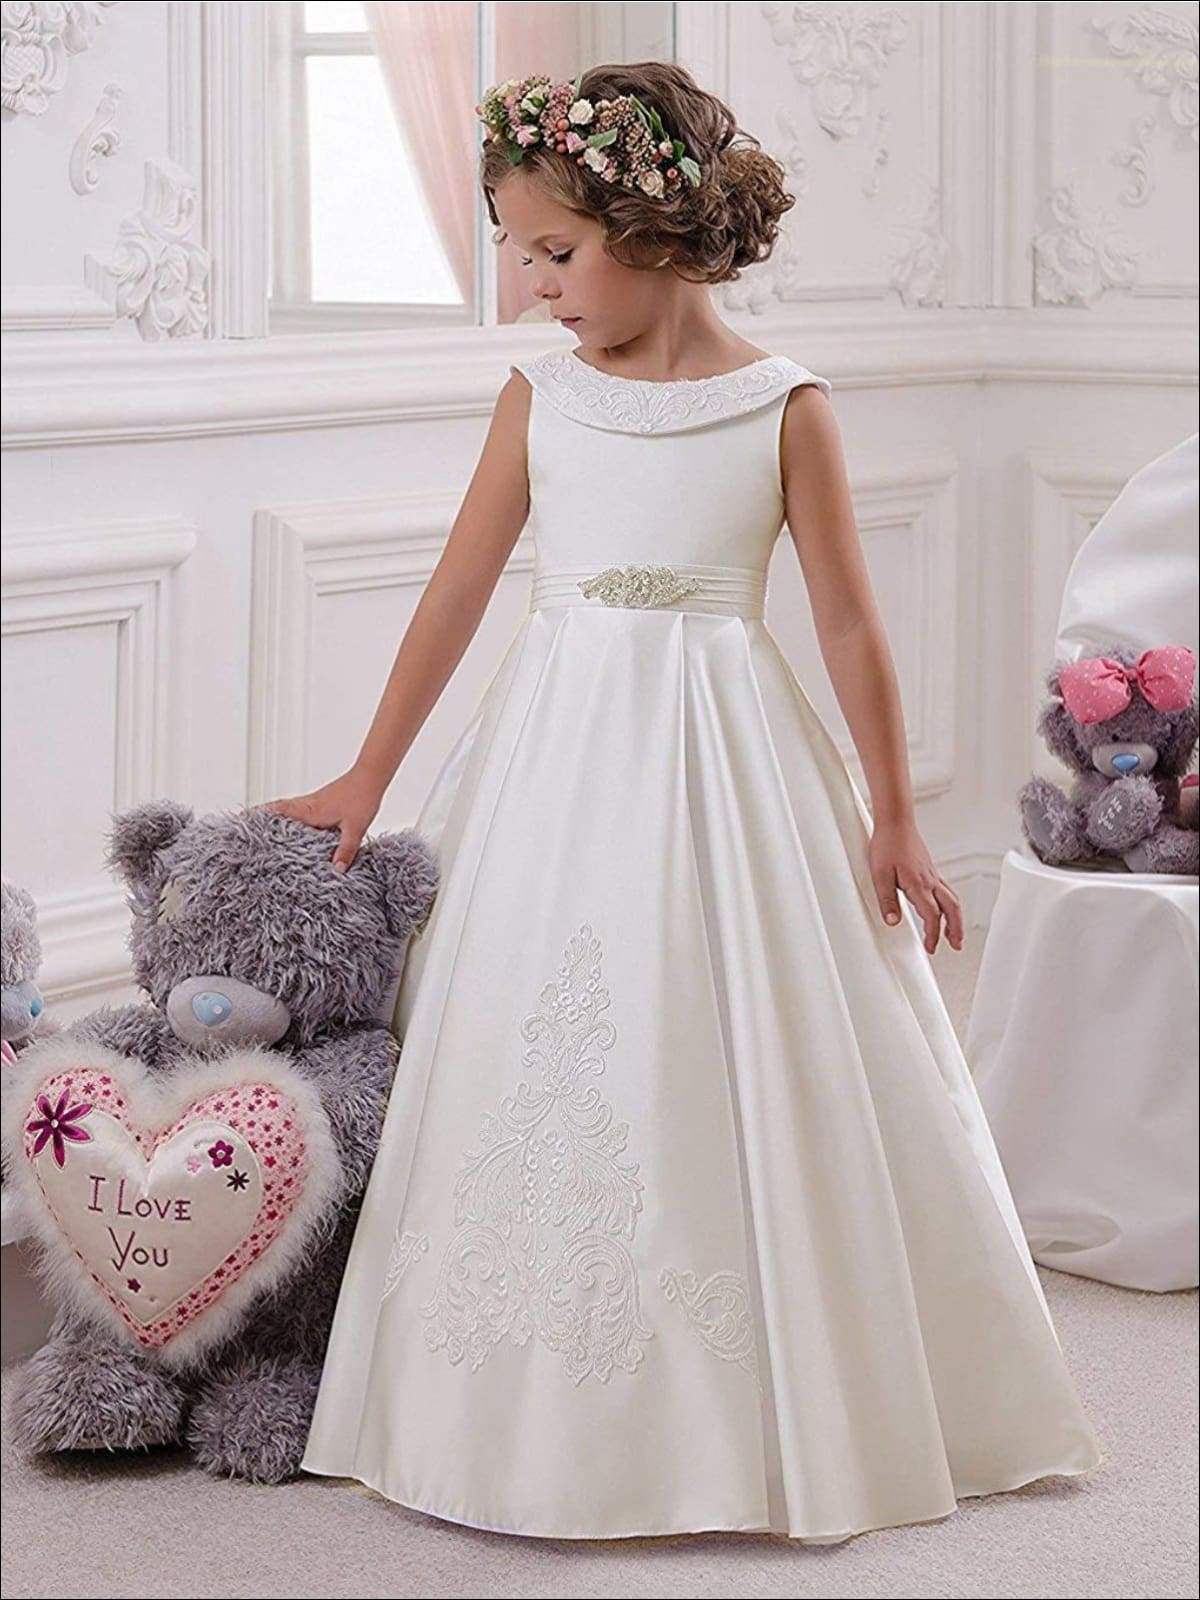 Girls Vintage Style Embellished Floor Length Gown with Crystal Applique - Ivory / 2T - Girls Gown